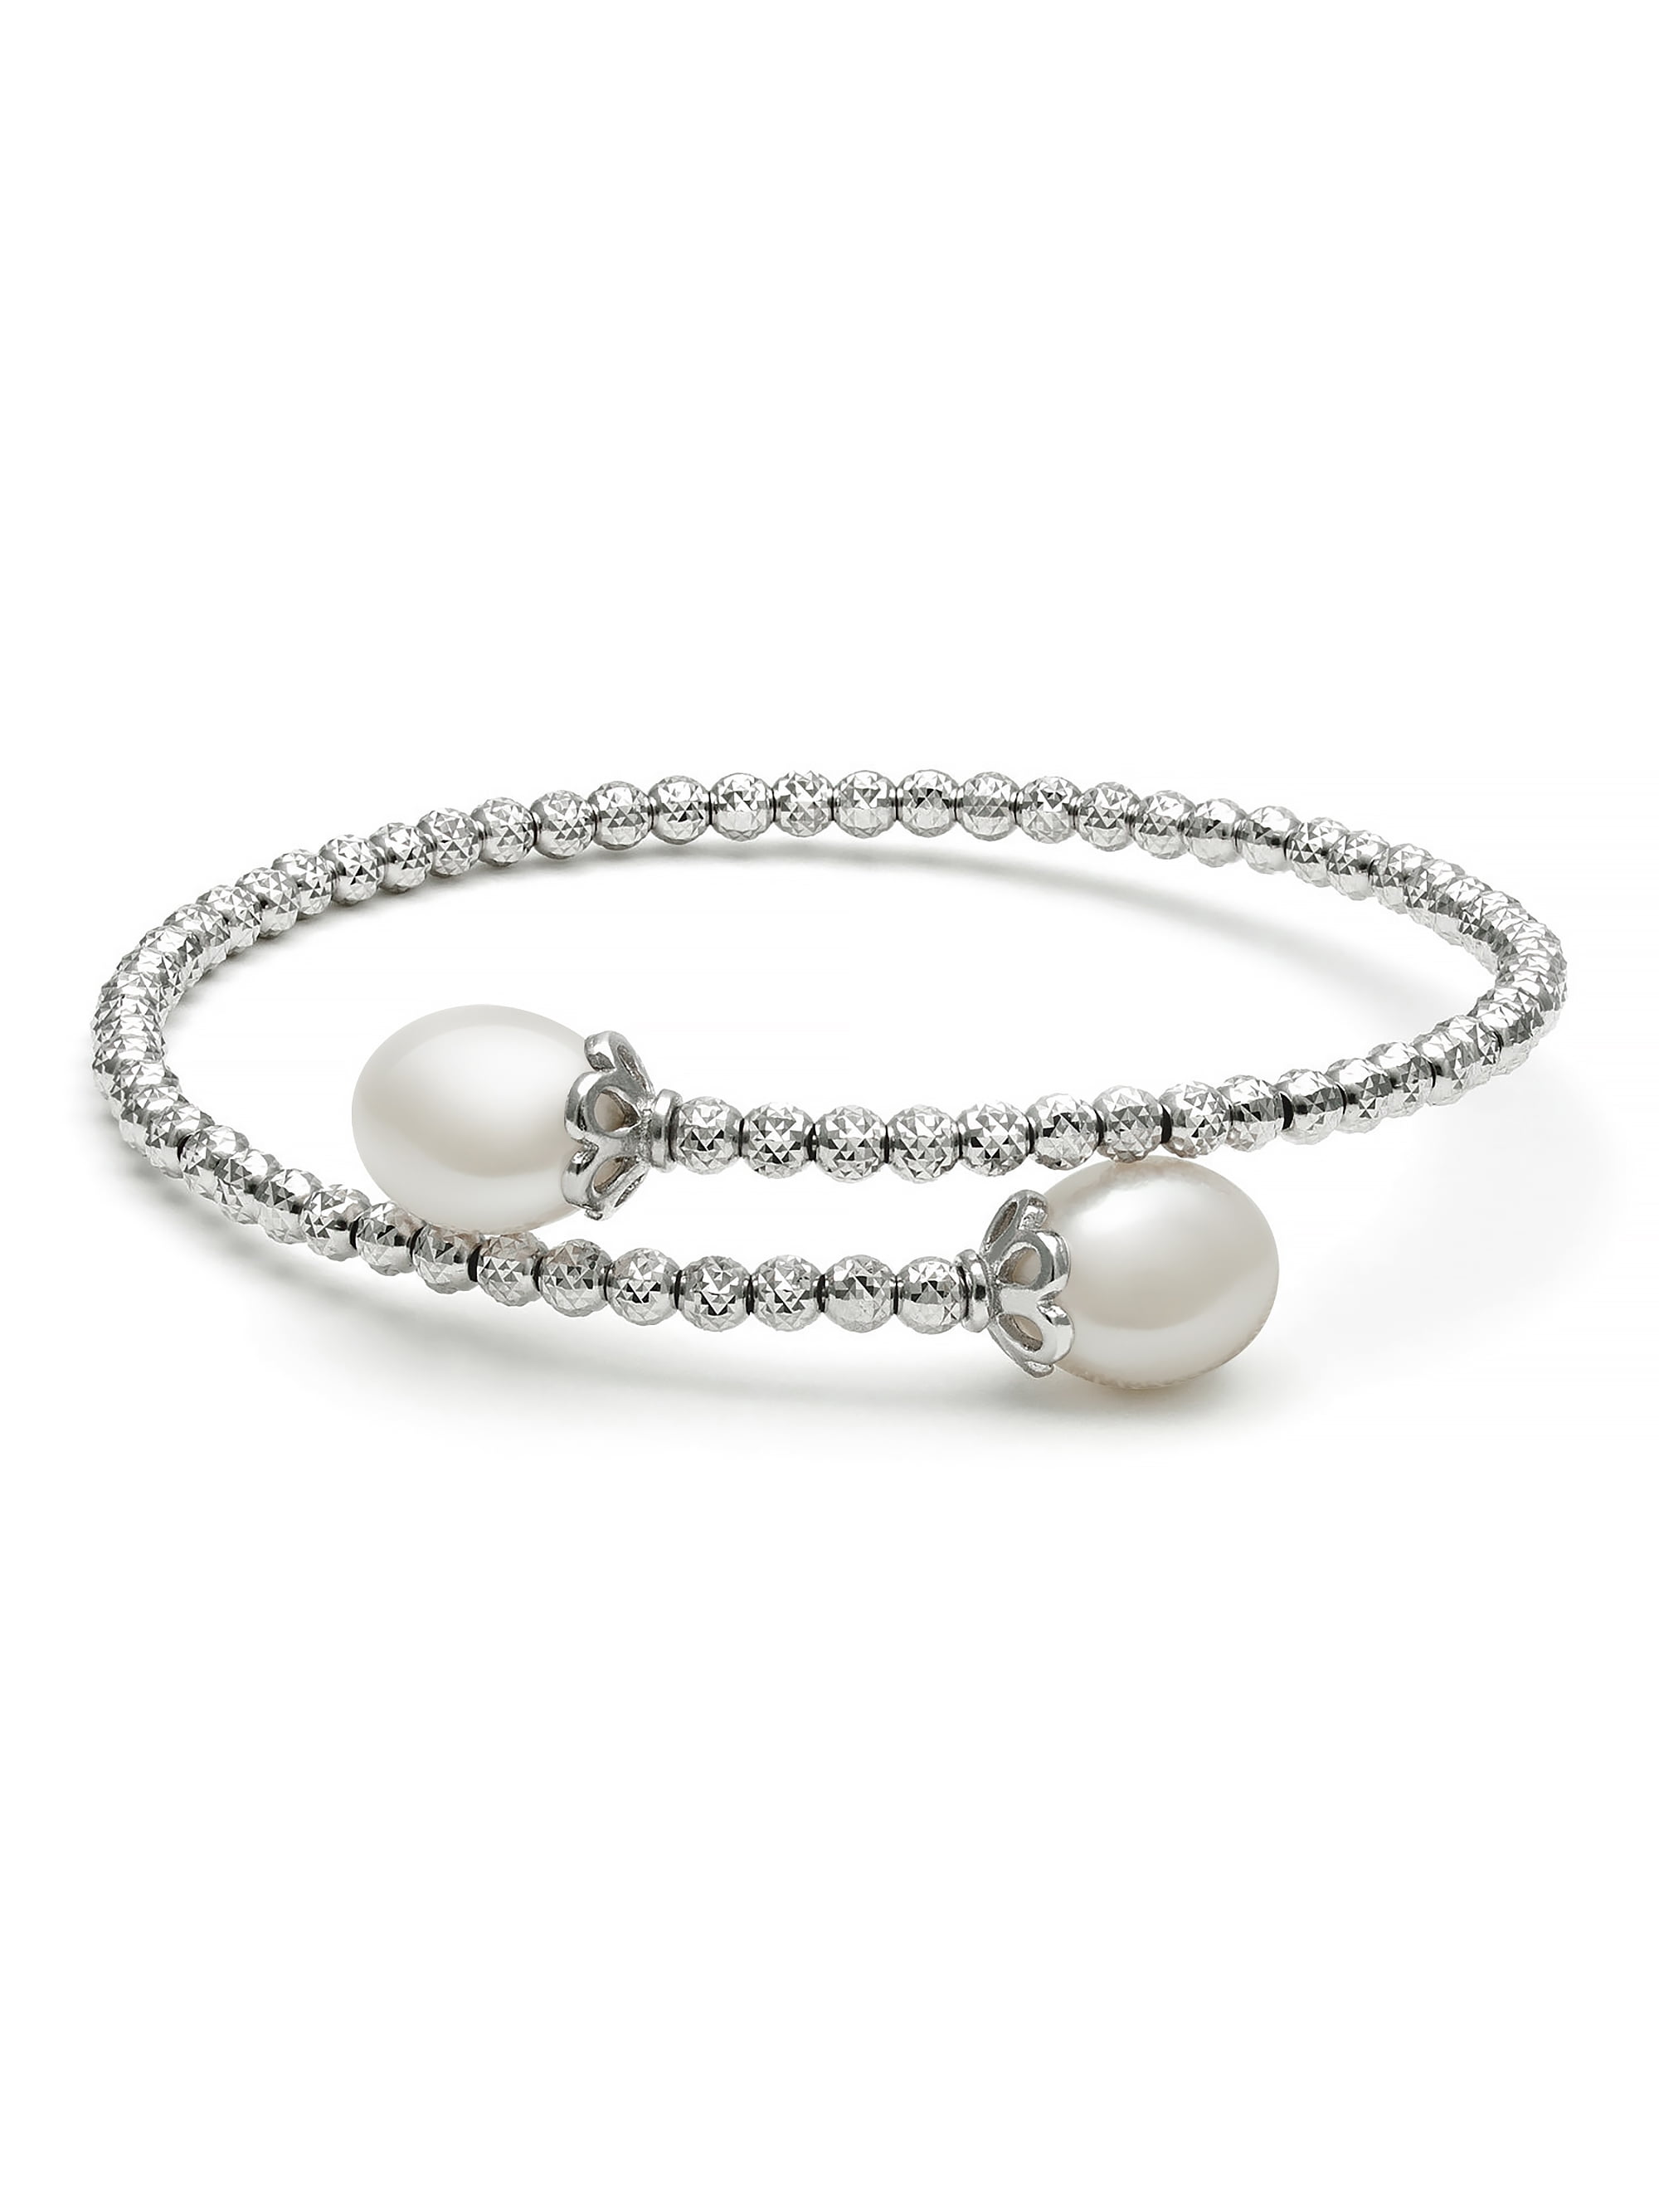 Pearlzzz - Cultured Freshwater Pearl and Sterling Silver Faceted Bead ...